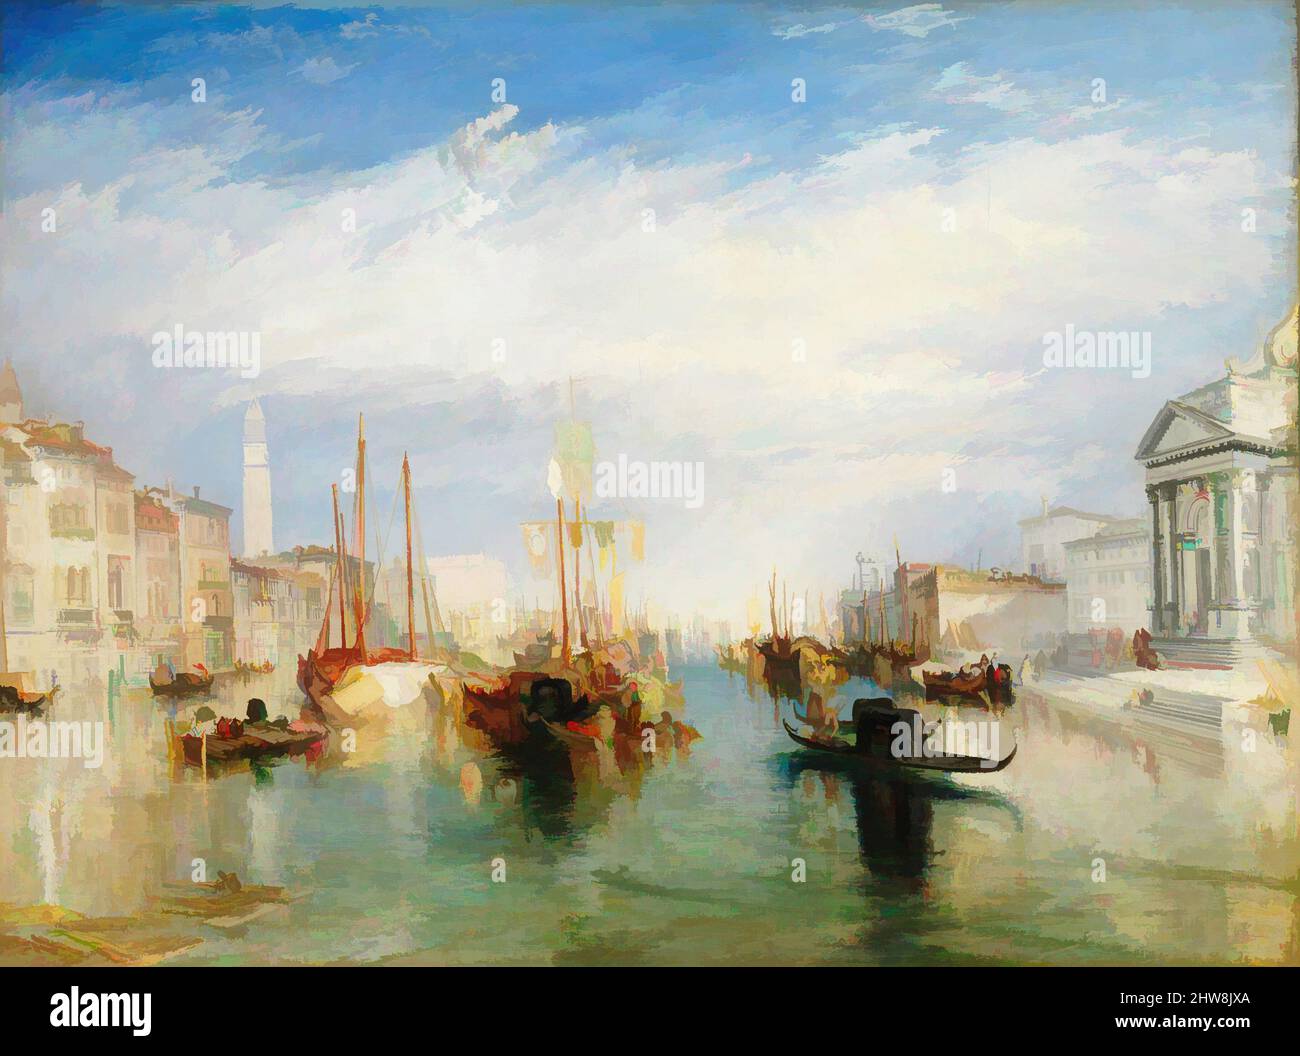 Art inspired by Venice, from the Porch of Madonna della Salute, ca. 1835, Oil on canvas, 36 x 48 1/8 in. (91.4 x 122.2 cm), Paintings, Joseph Mallord William Turner (British, London 1775–1851 London), Turner drew on his considerable experience as a marine painter and the brilliance of, Classic works modernized by Artotop with a splash of modernity. Shapes, color and value, eye-catching visual impact on art. Emotions through freedom of artworks in a contemporary way. A timeless message pursuing a wildly creative new direction. Artists turning to the digital medium and creating the Artotop NFT Stock Photo